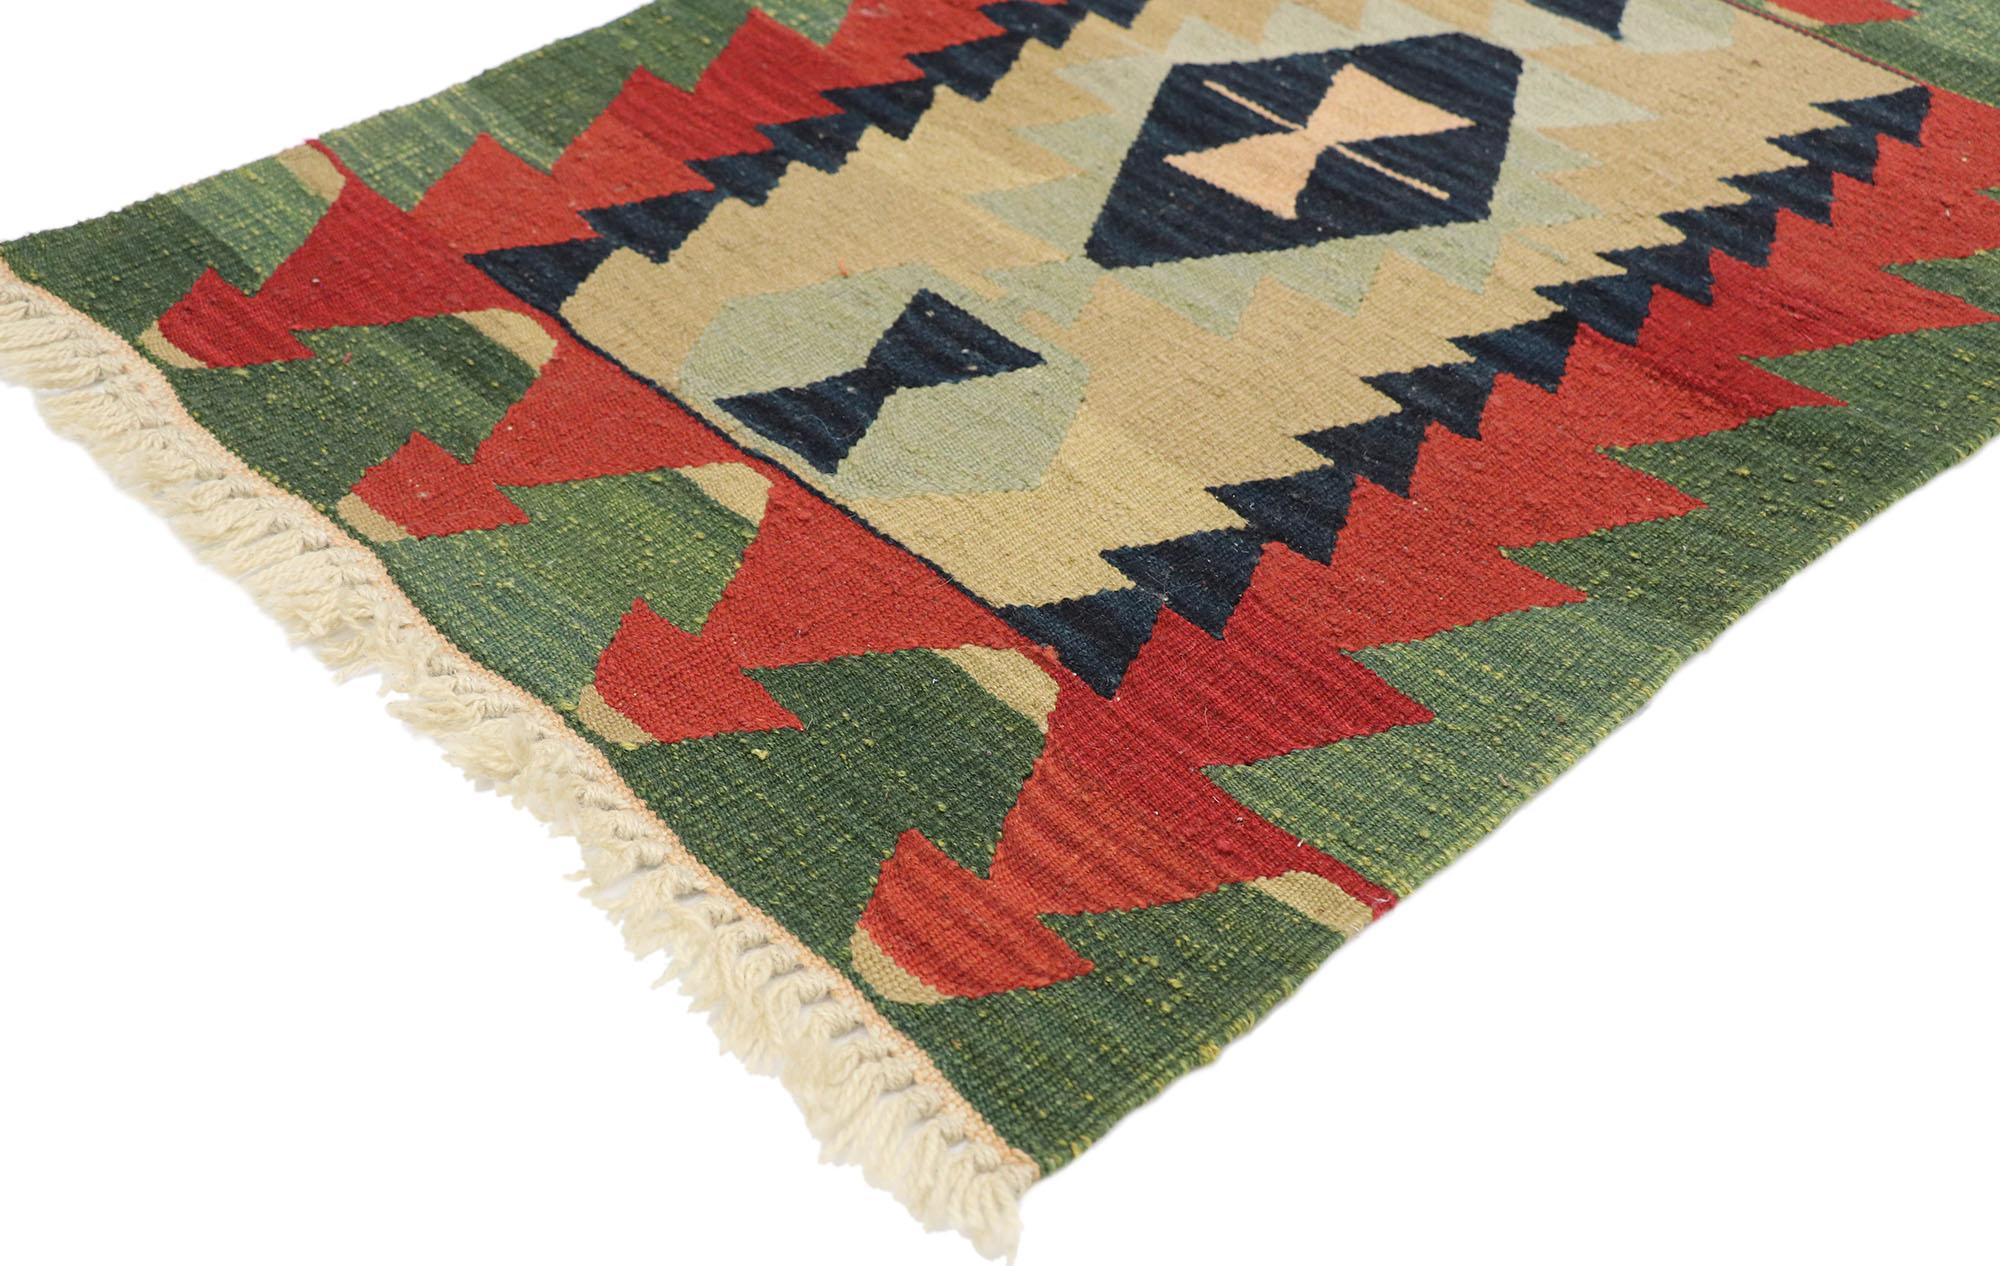 77884, Vintage Persian Shiraz Kilim rug with Tribal Style 02'00 x 02'10. Full of tiny details and a bold expressive design combined with vibrant colors and tribal style, this hand-woven wool vintage Persian Shiraz kilim rug is a captivating vision